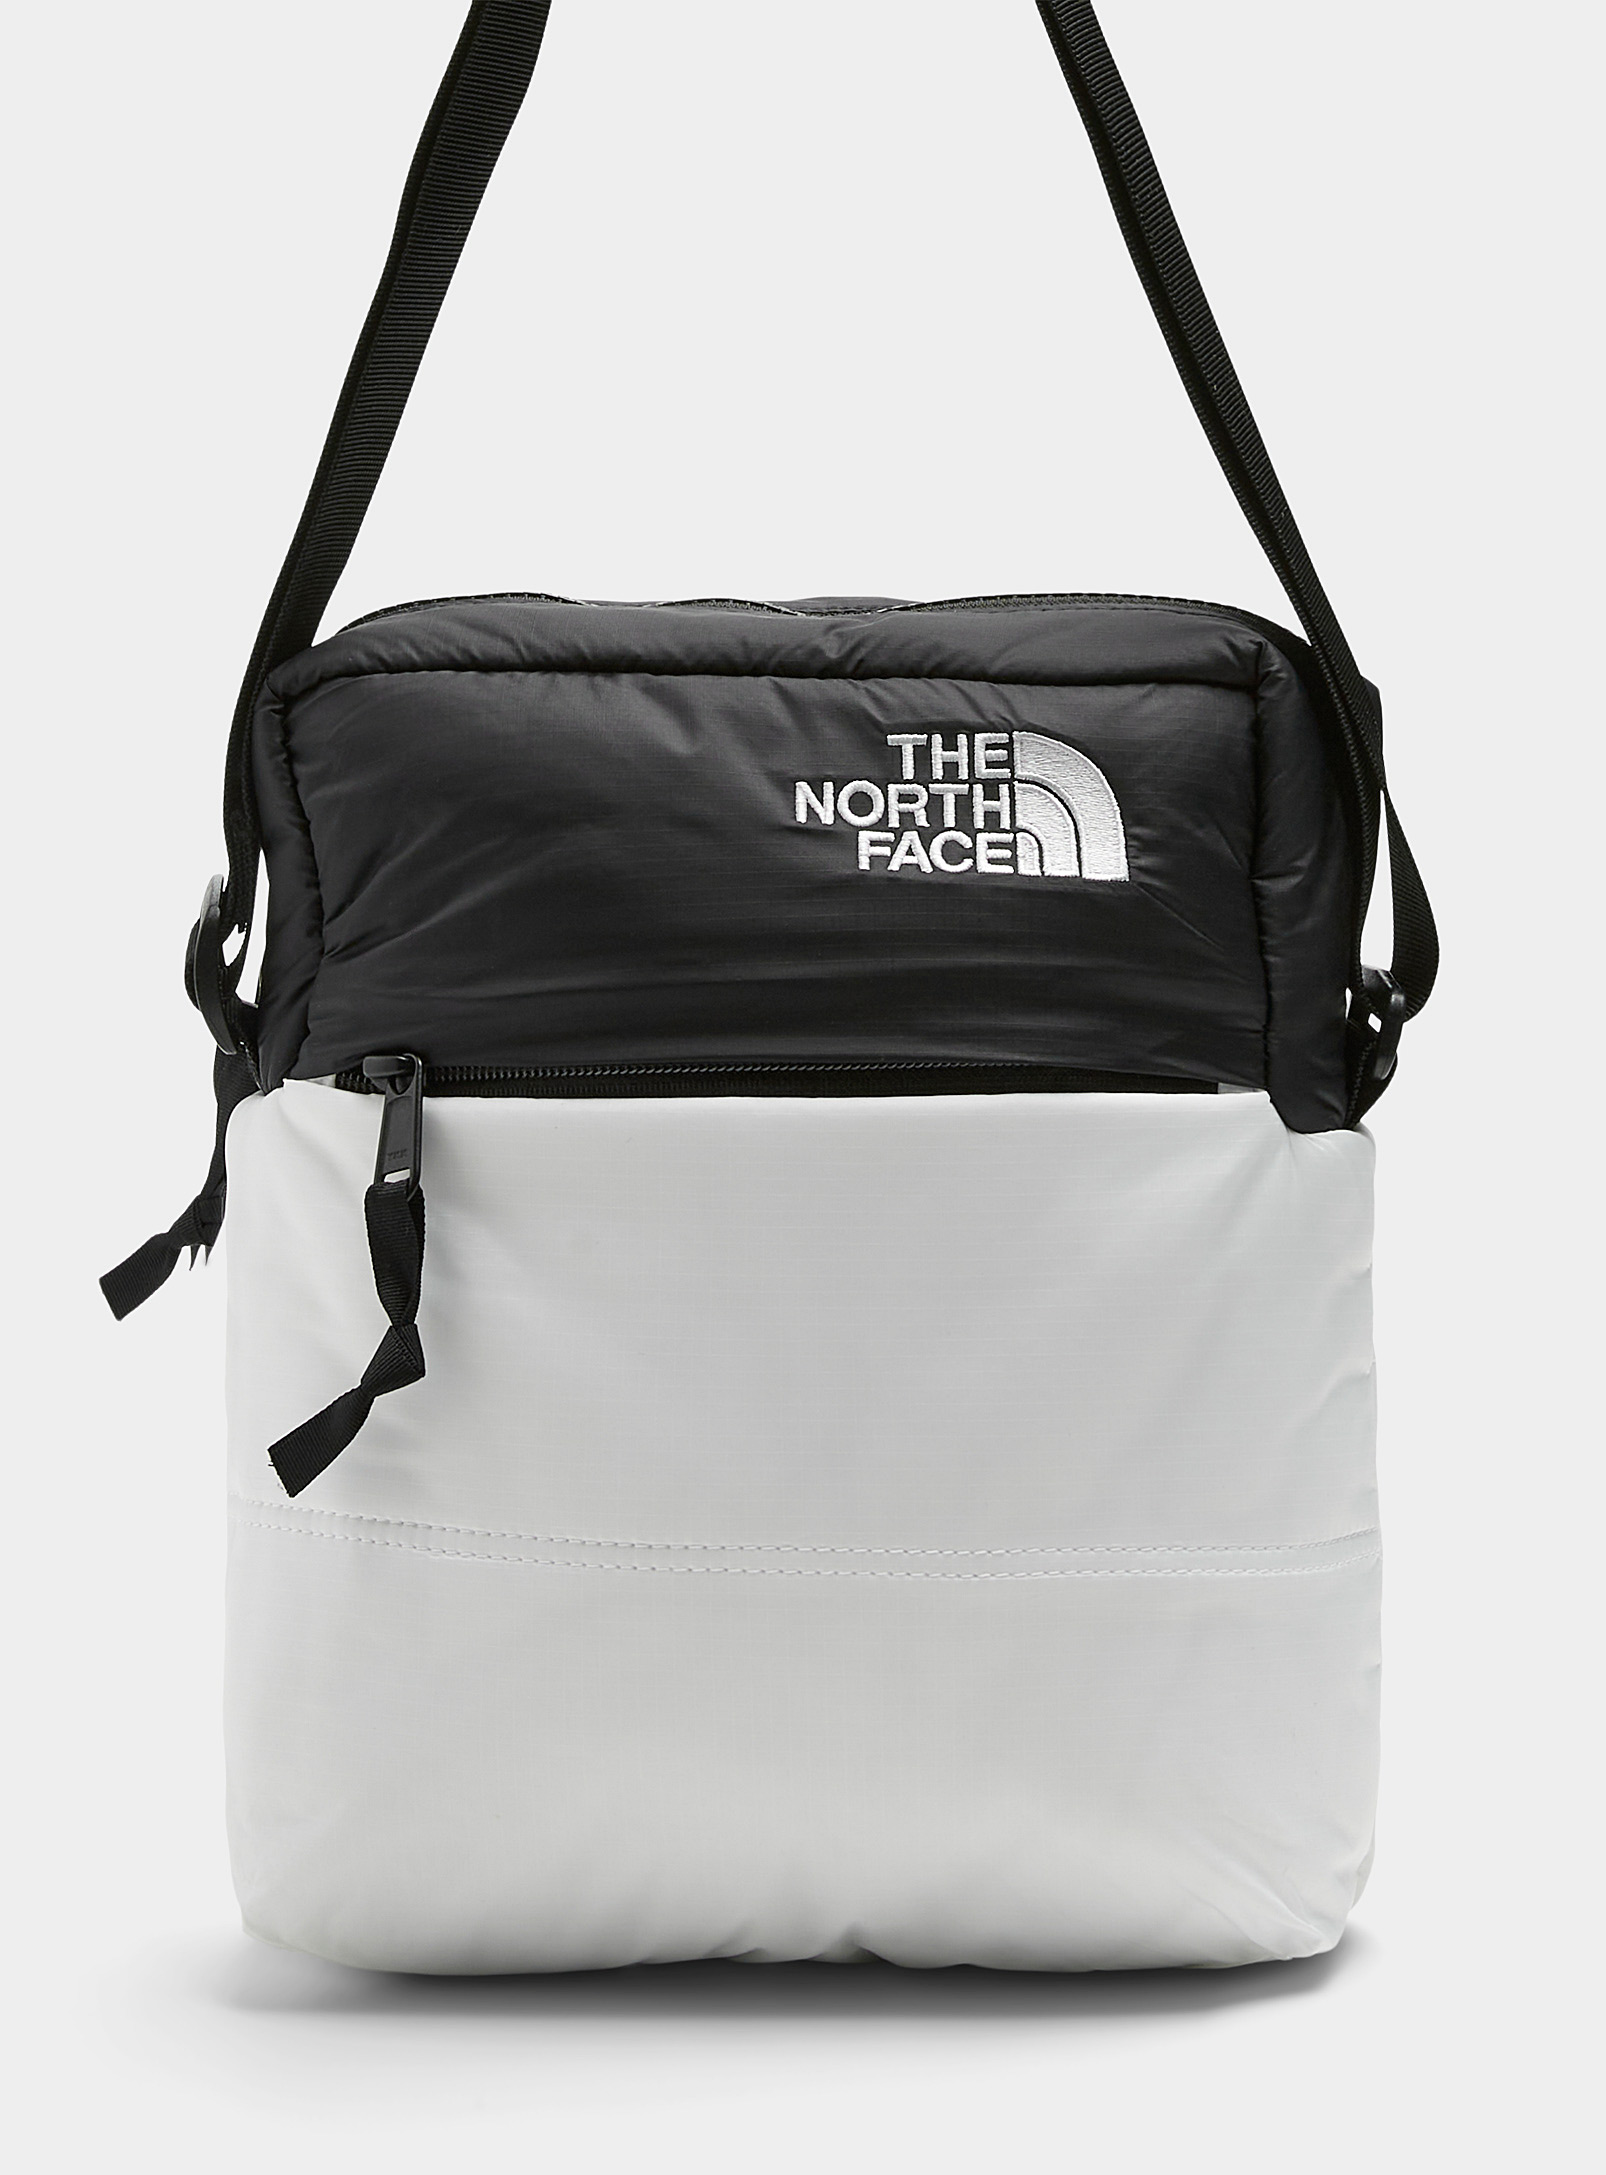 THE NORTH FACE NUPTSE QUILTED SHOULDER BAG